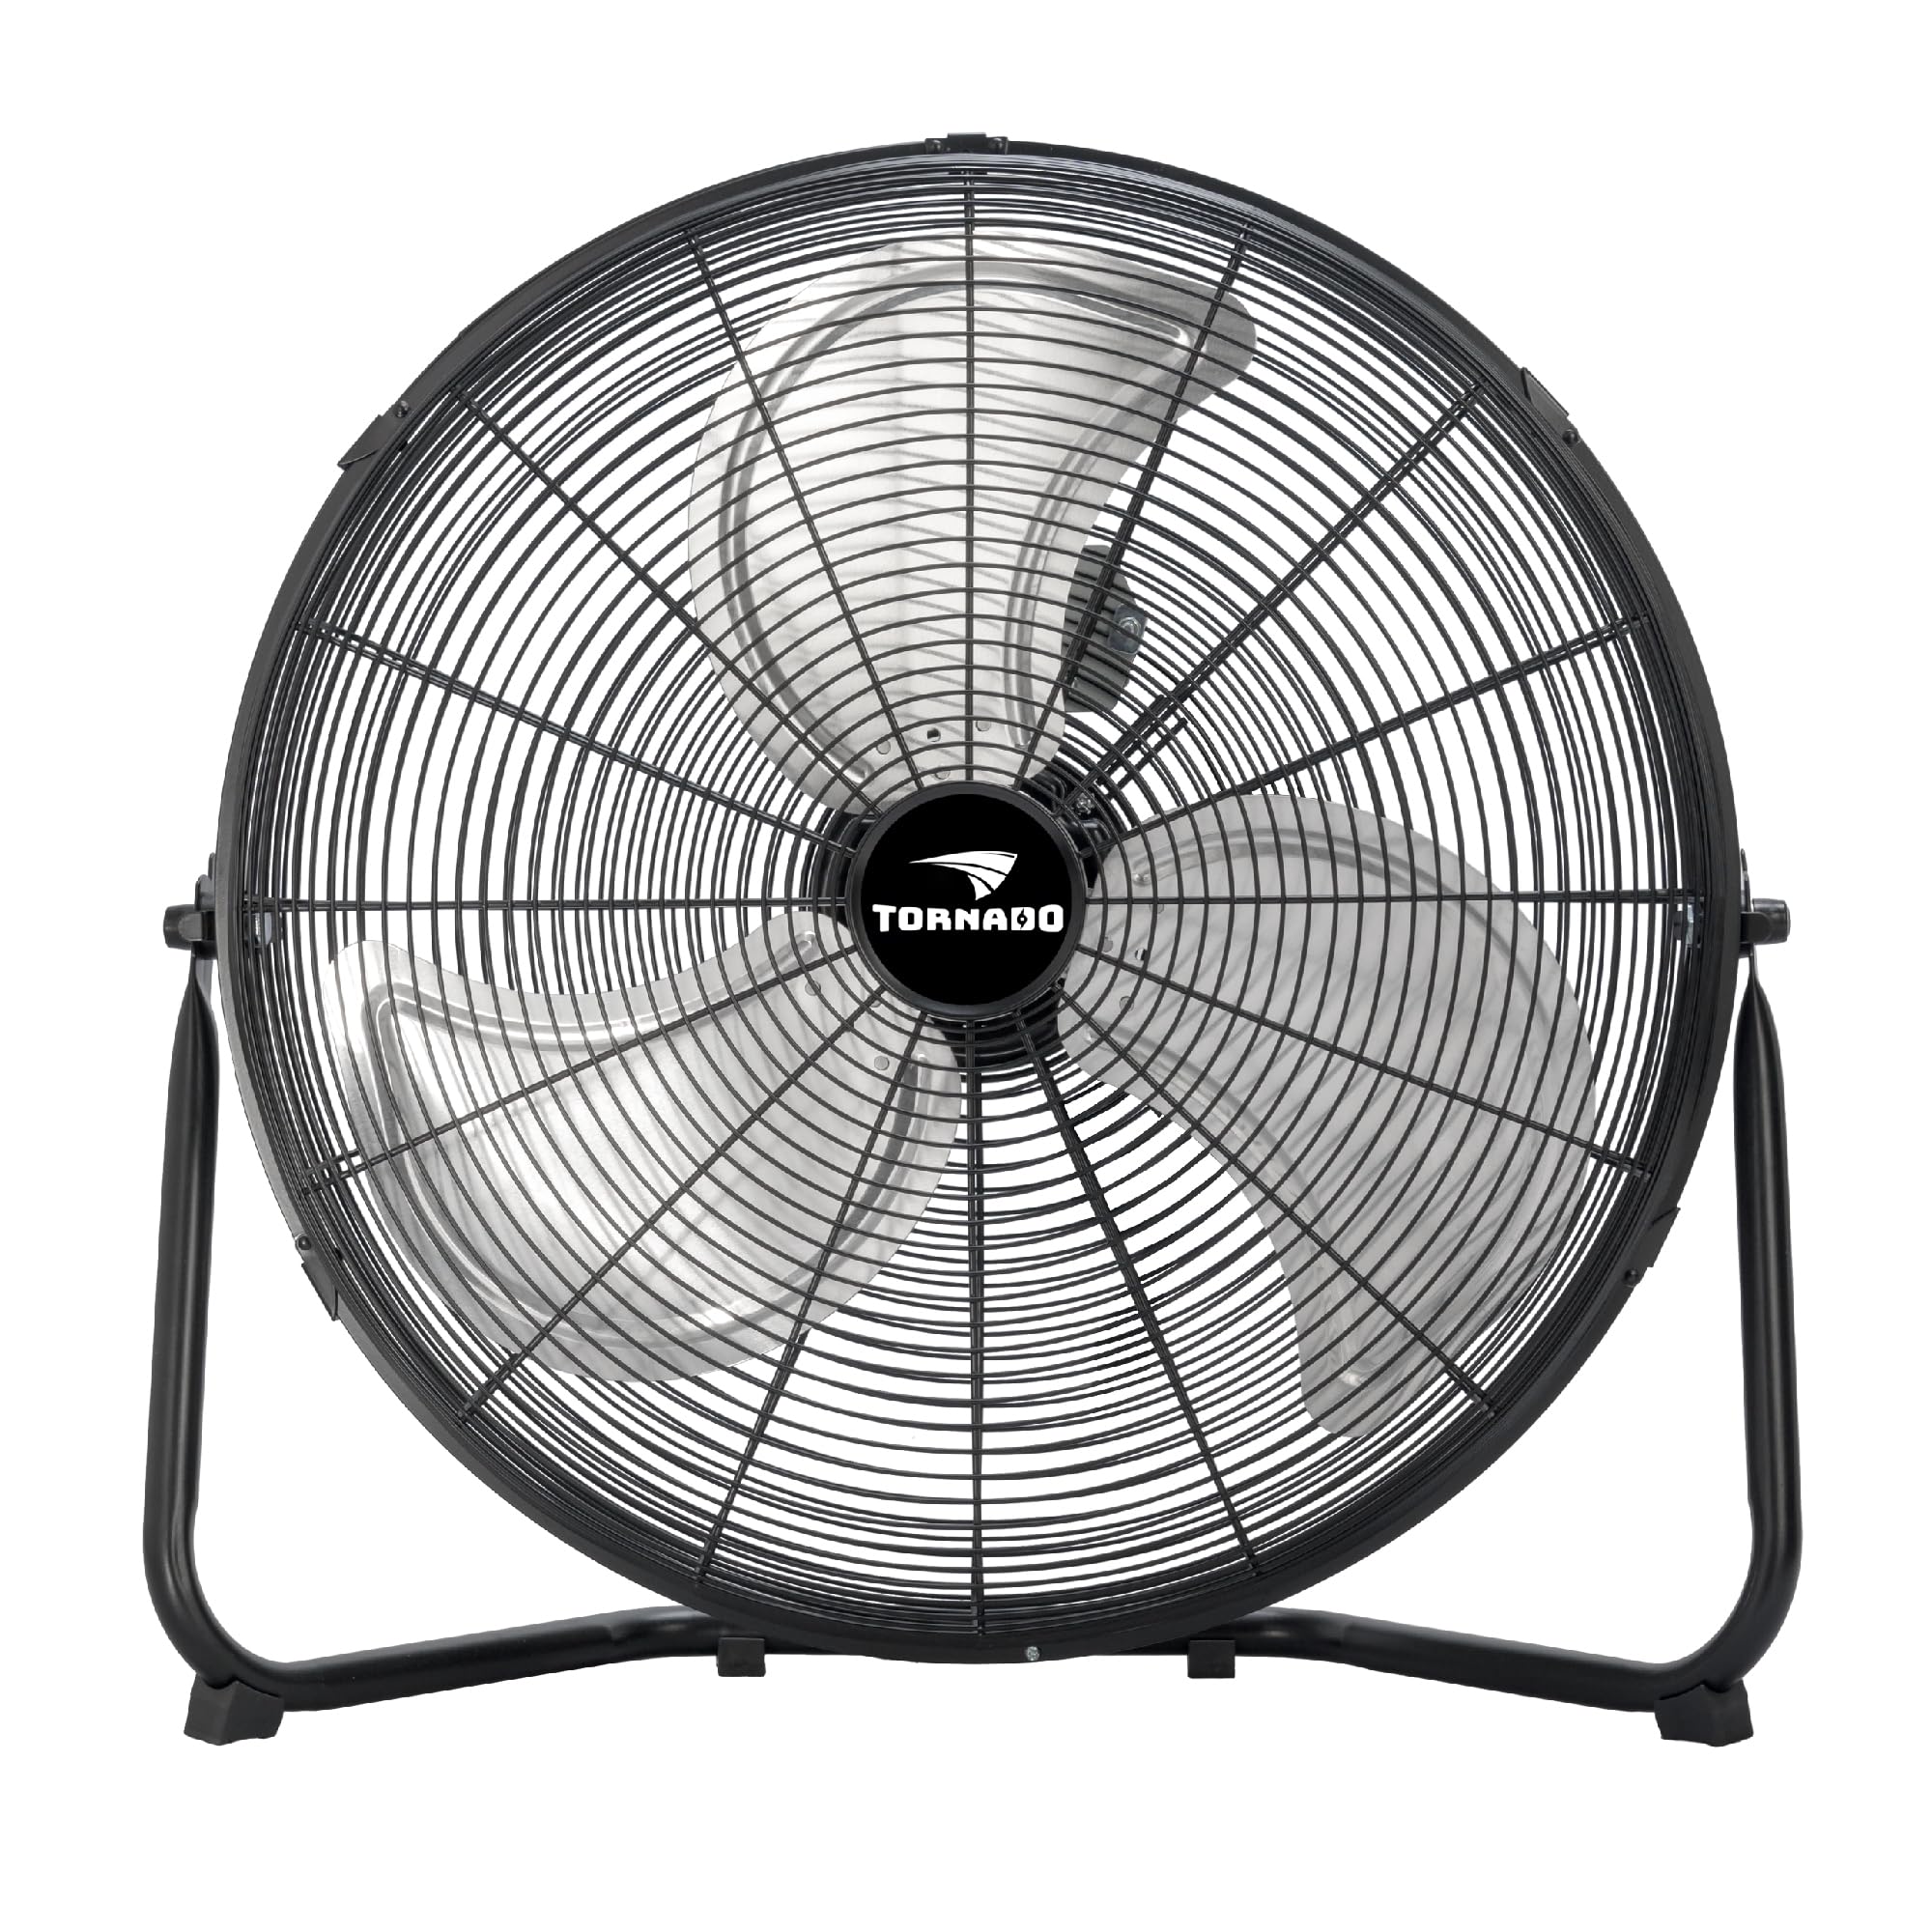 Tornado 20 Inch High Velocity Metal Floor Fan, 3-Speed Powerful Cooling for Industrial, Commercial, and Home Spaces, 120°Tilt, 6.0 FT Cord - UL safety Listed, Black